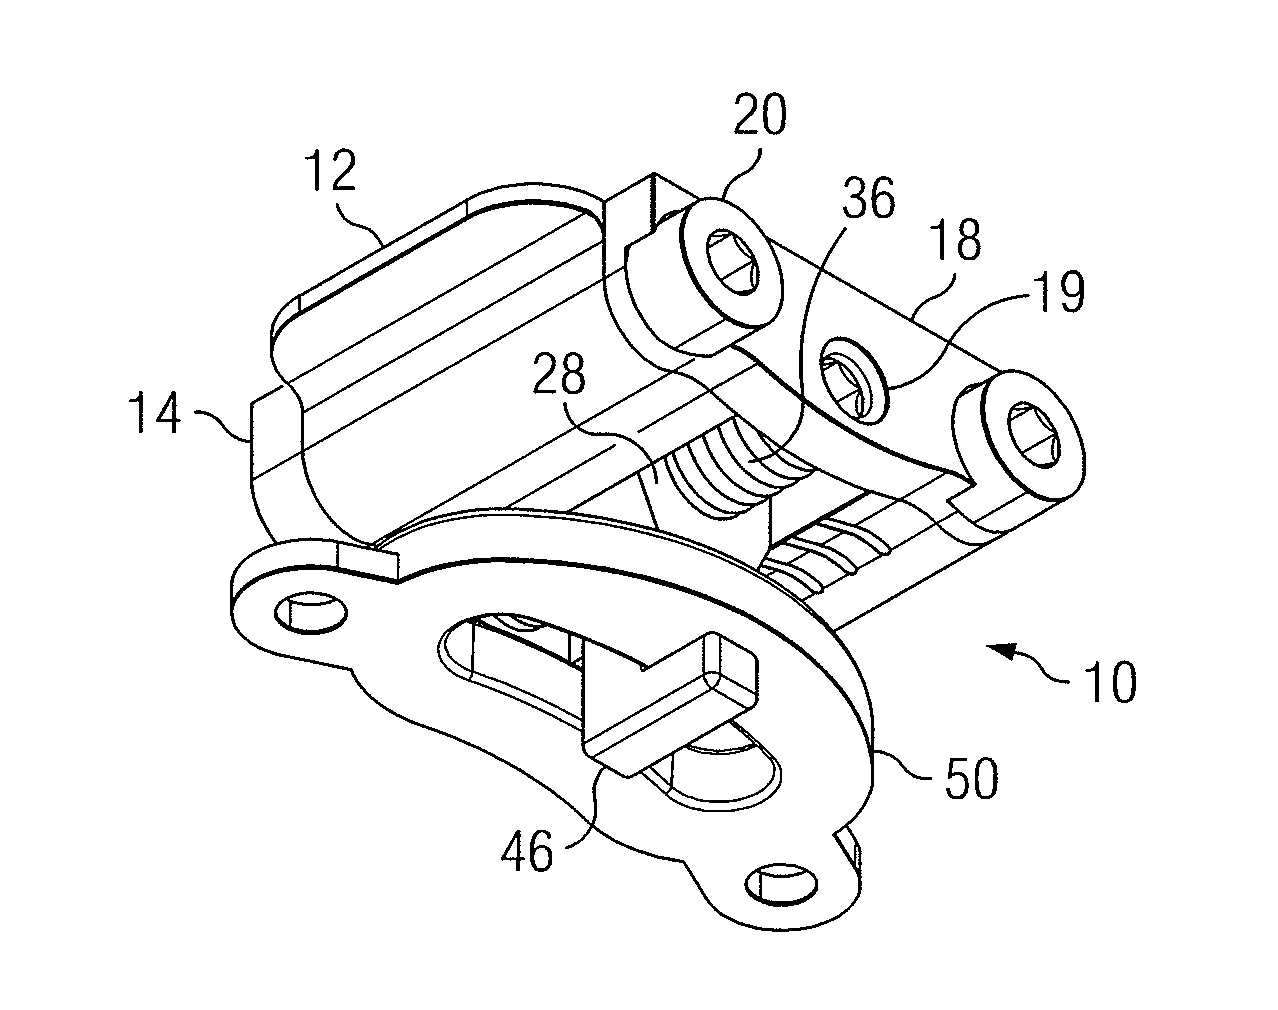 System for Coupling an Oral Appliance to a Medical Mask